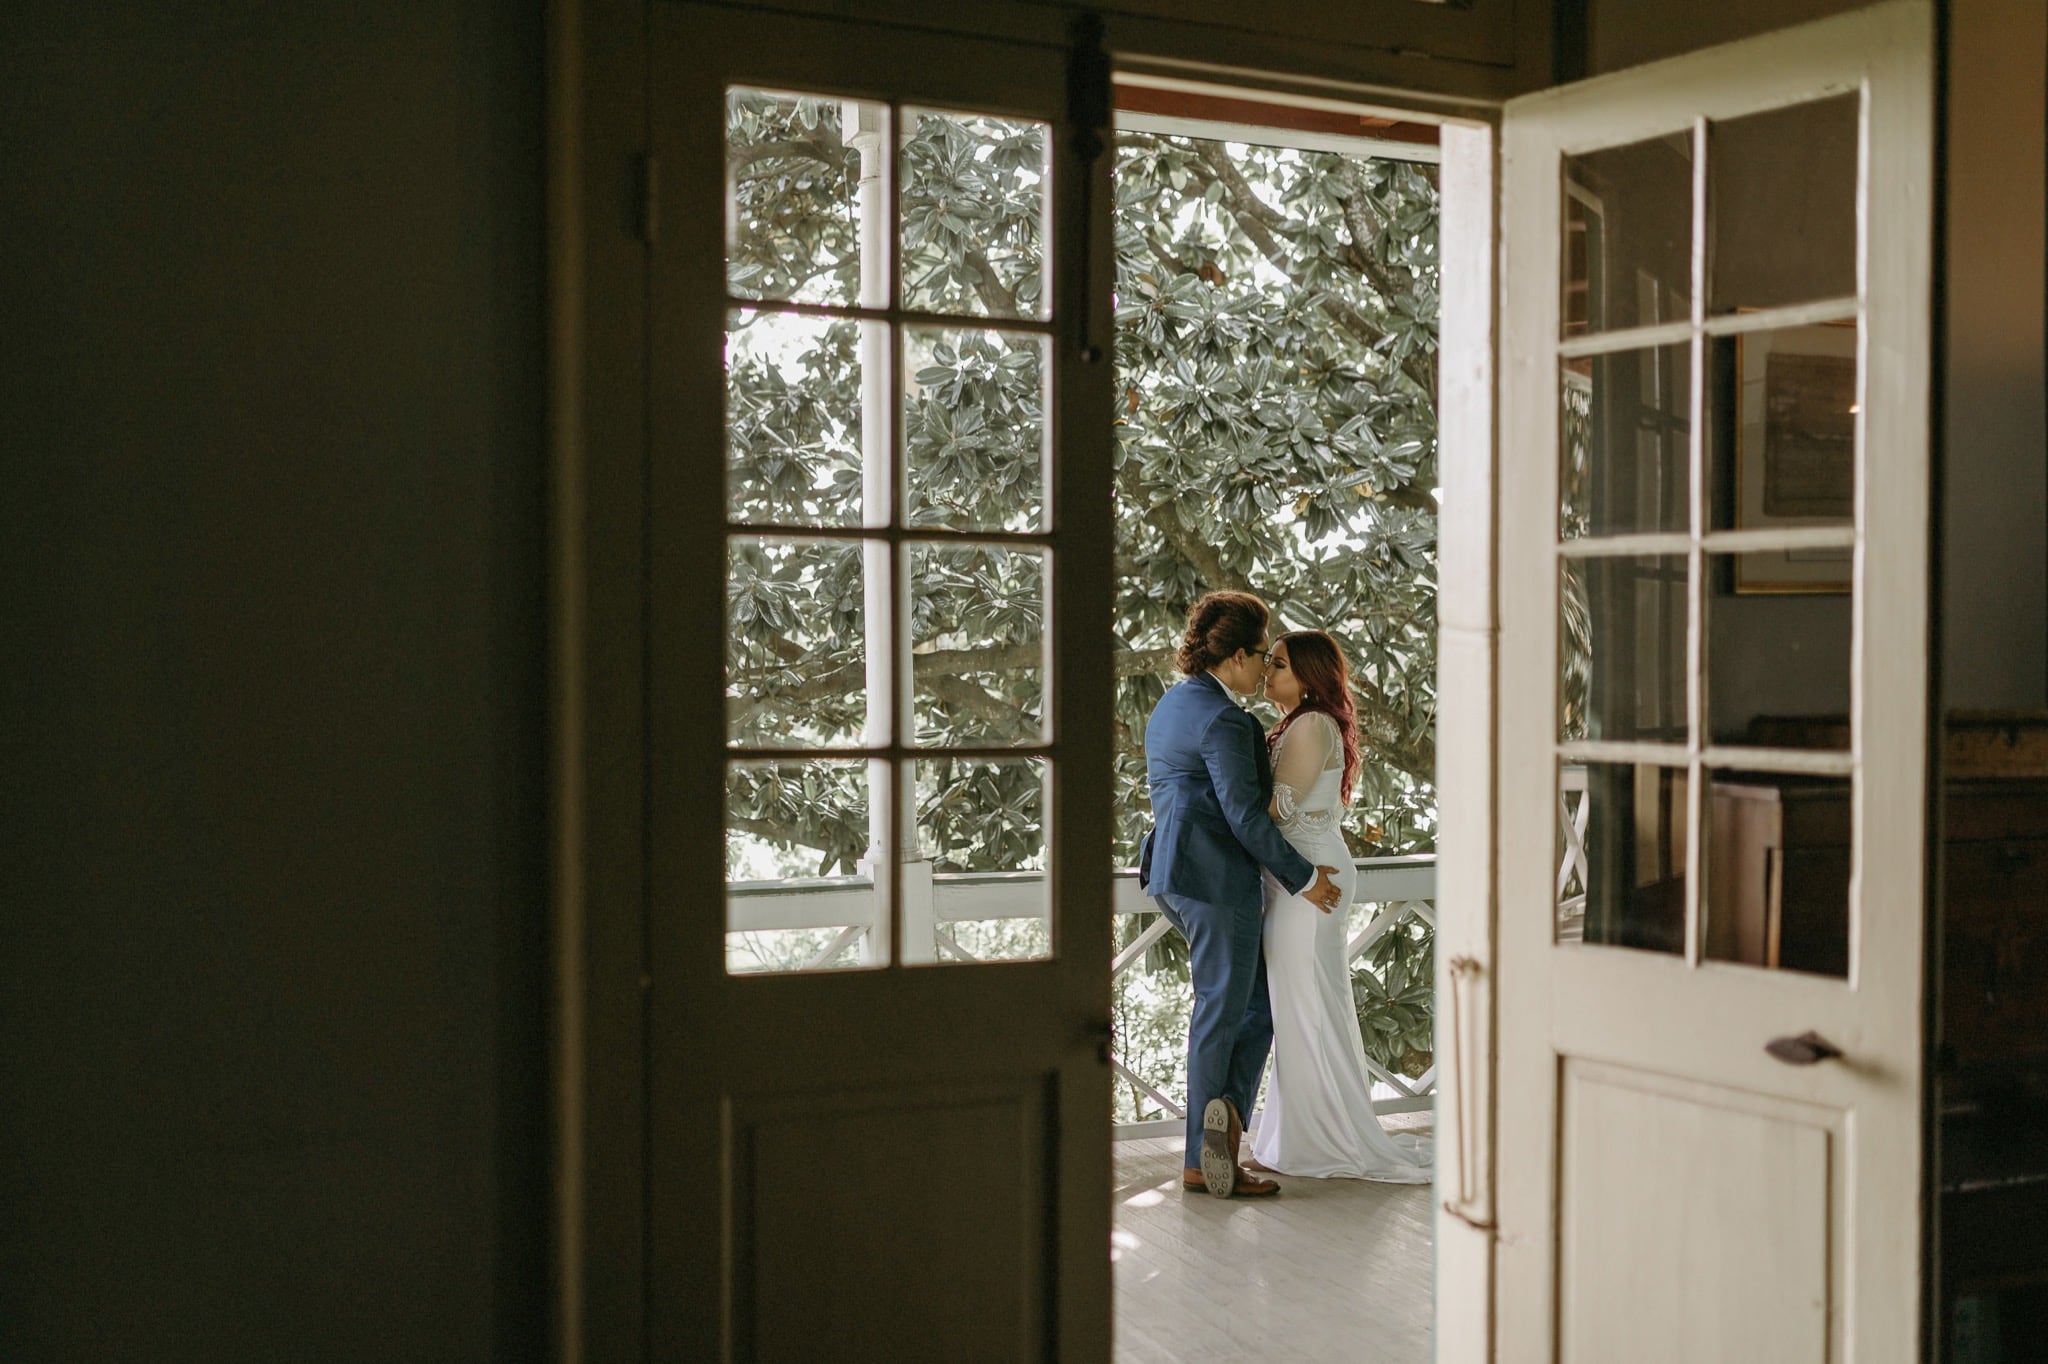 New Orleans Pitot House wedding